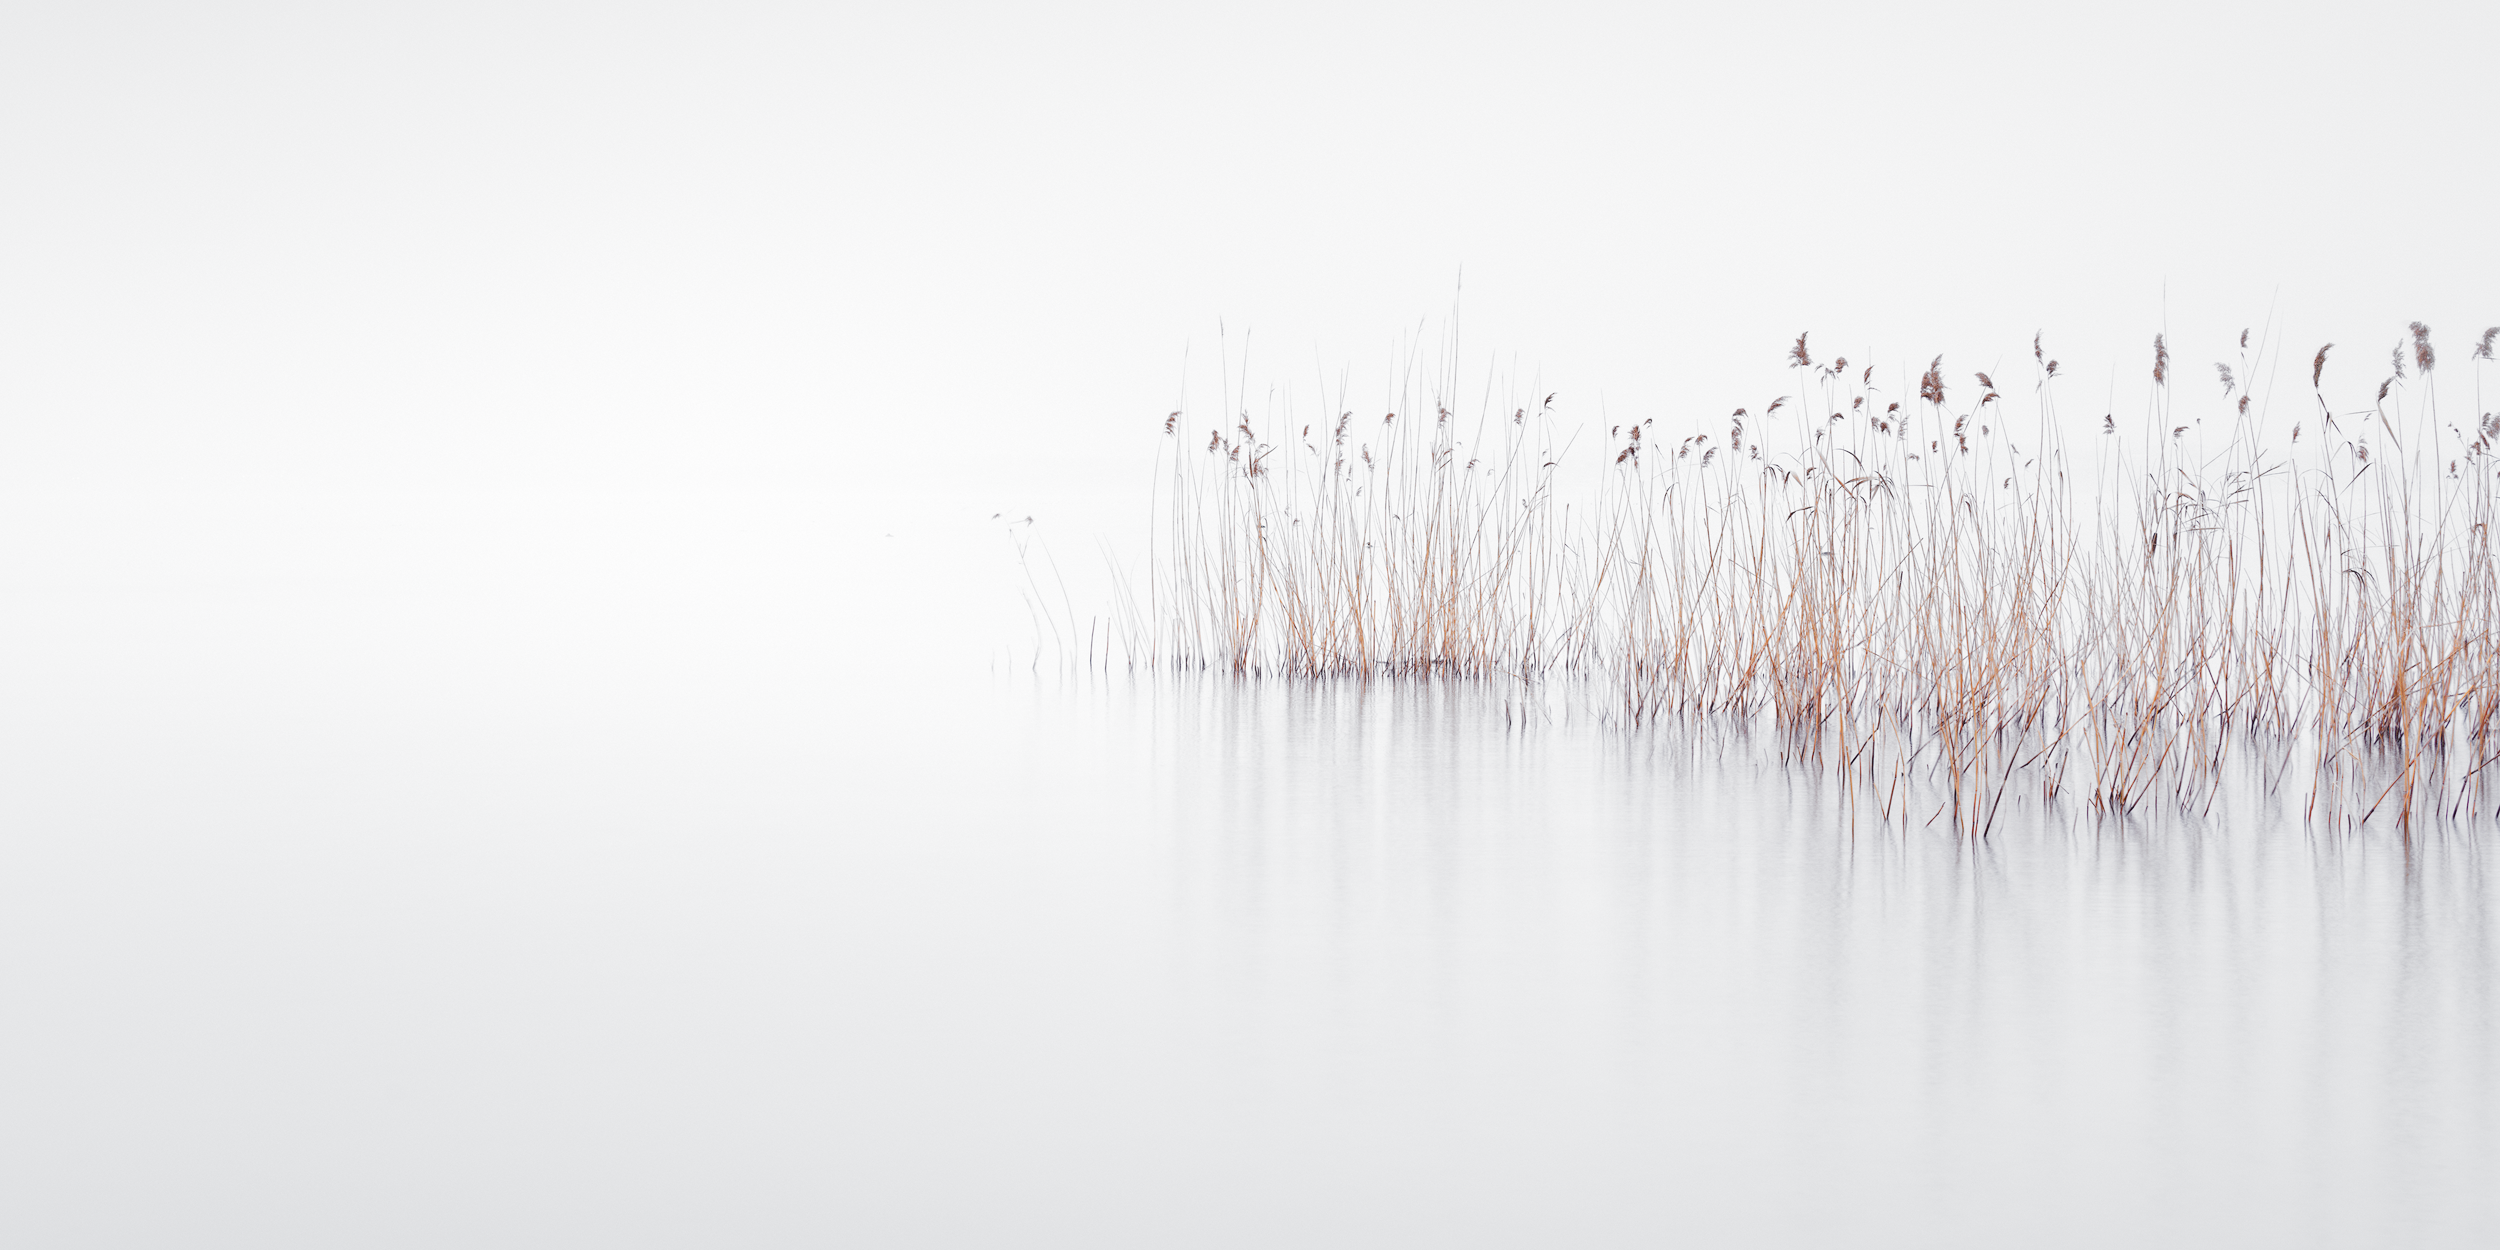 among reeds | italy, 2020